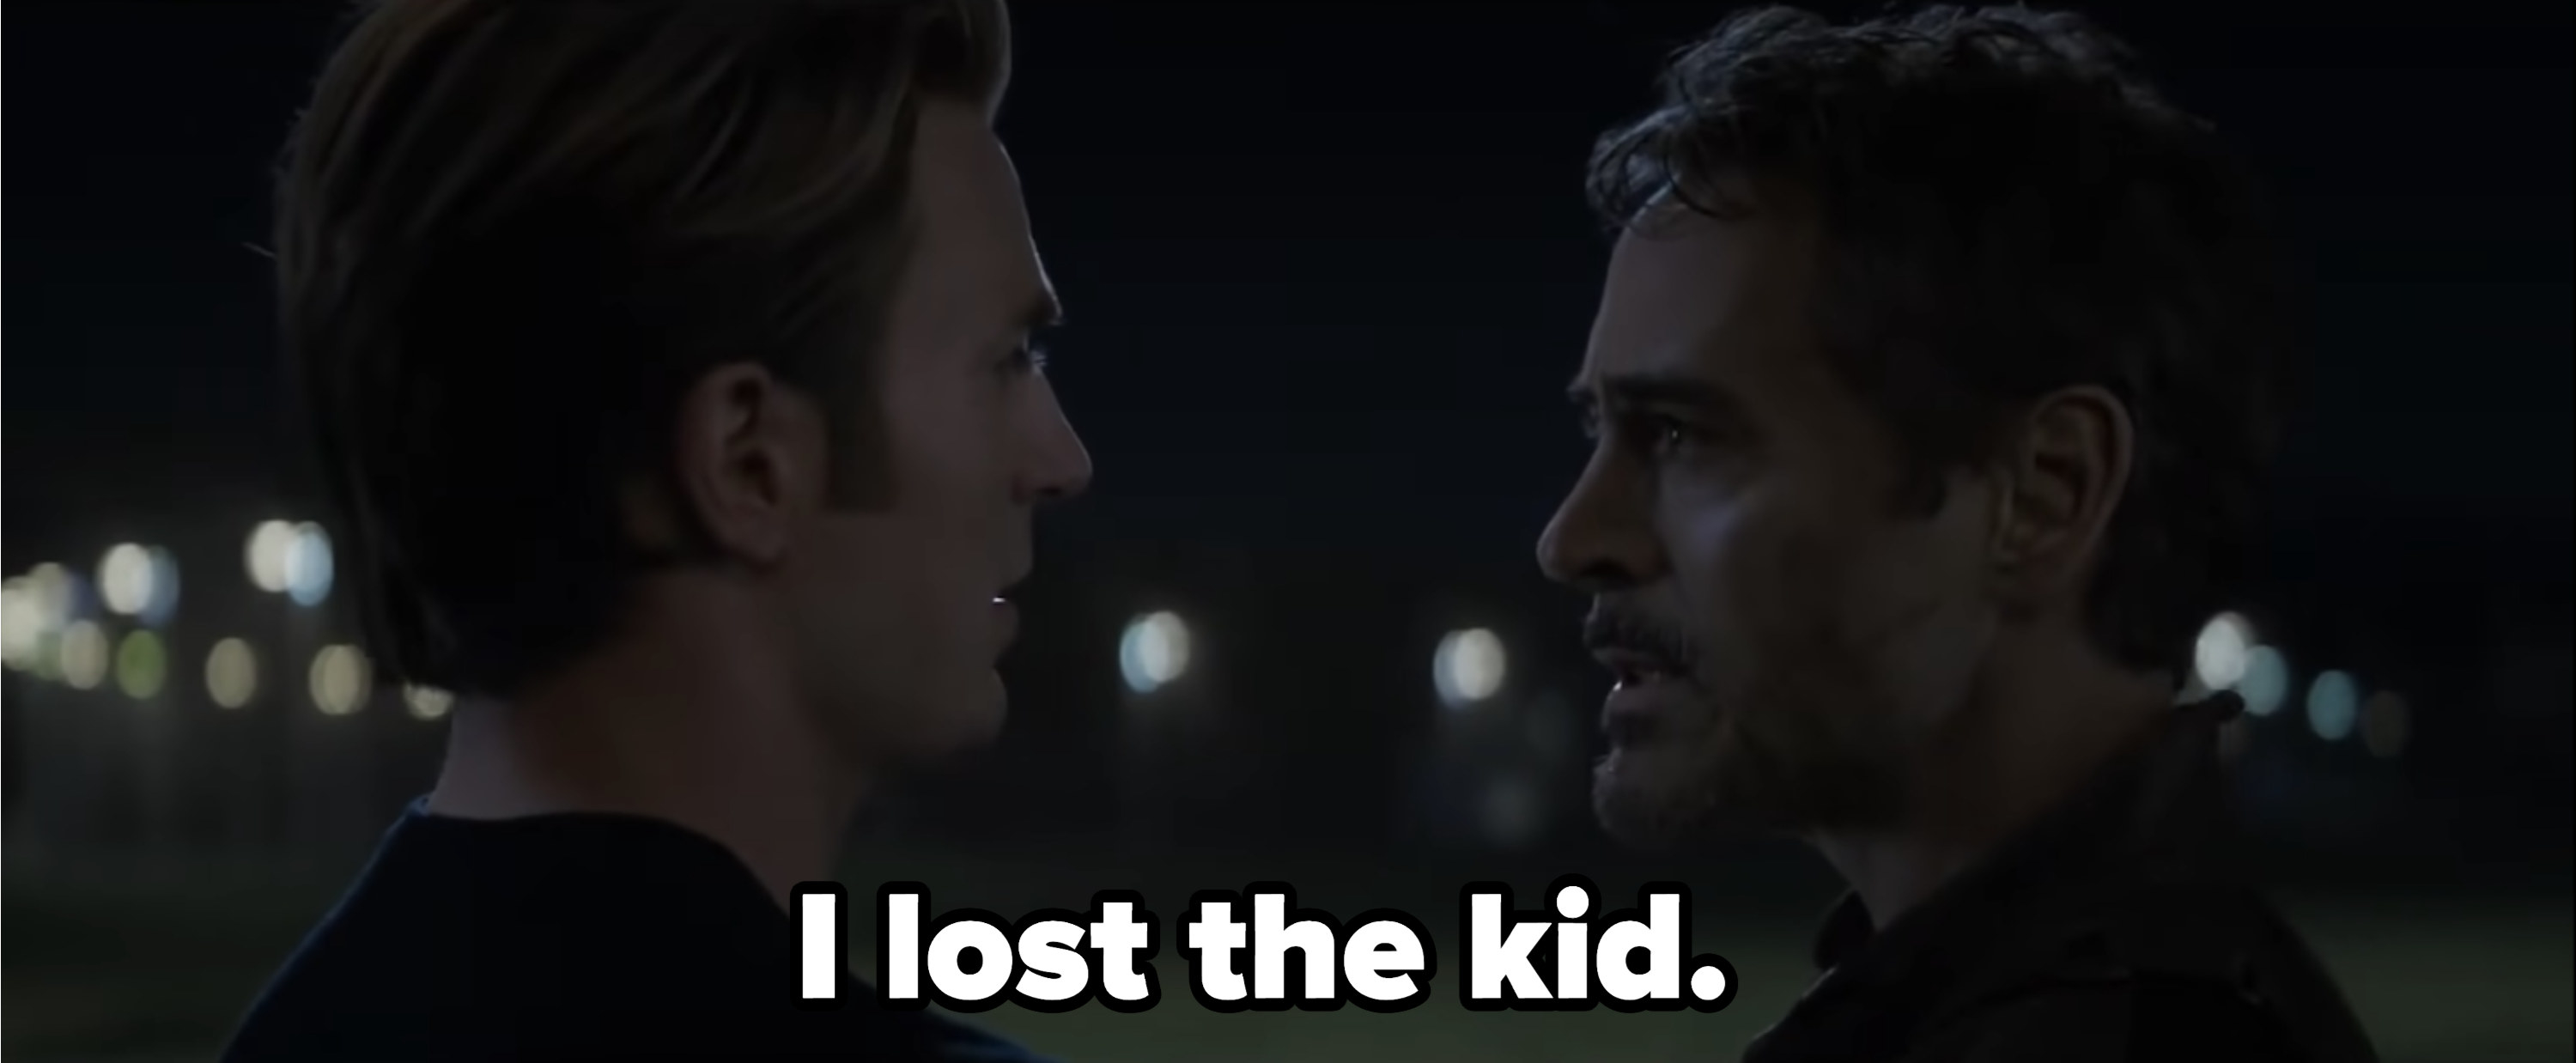 Tony telling Steve, &quot;I lost the kid.&quot; in reference to Spider-Man dying.